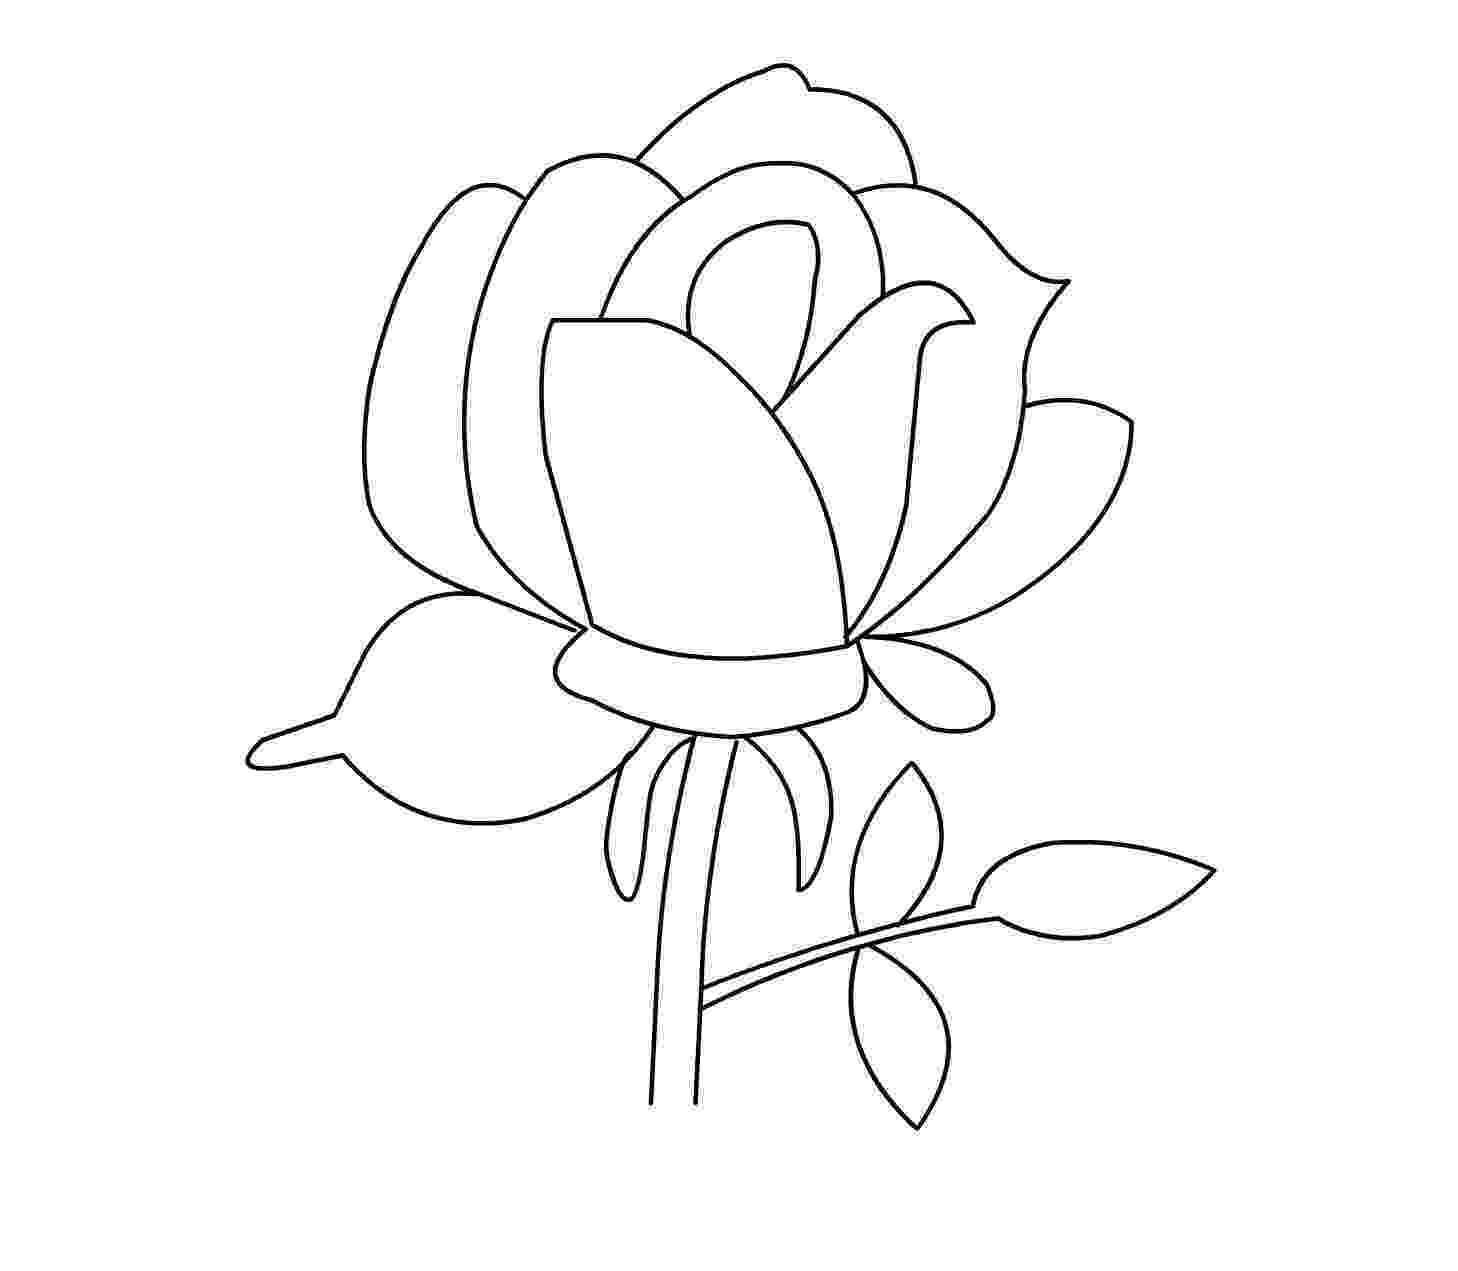 printable rose coloring pages free printable roses coloring pages for kids printable rose coloring pages 1 1